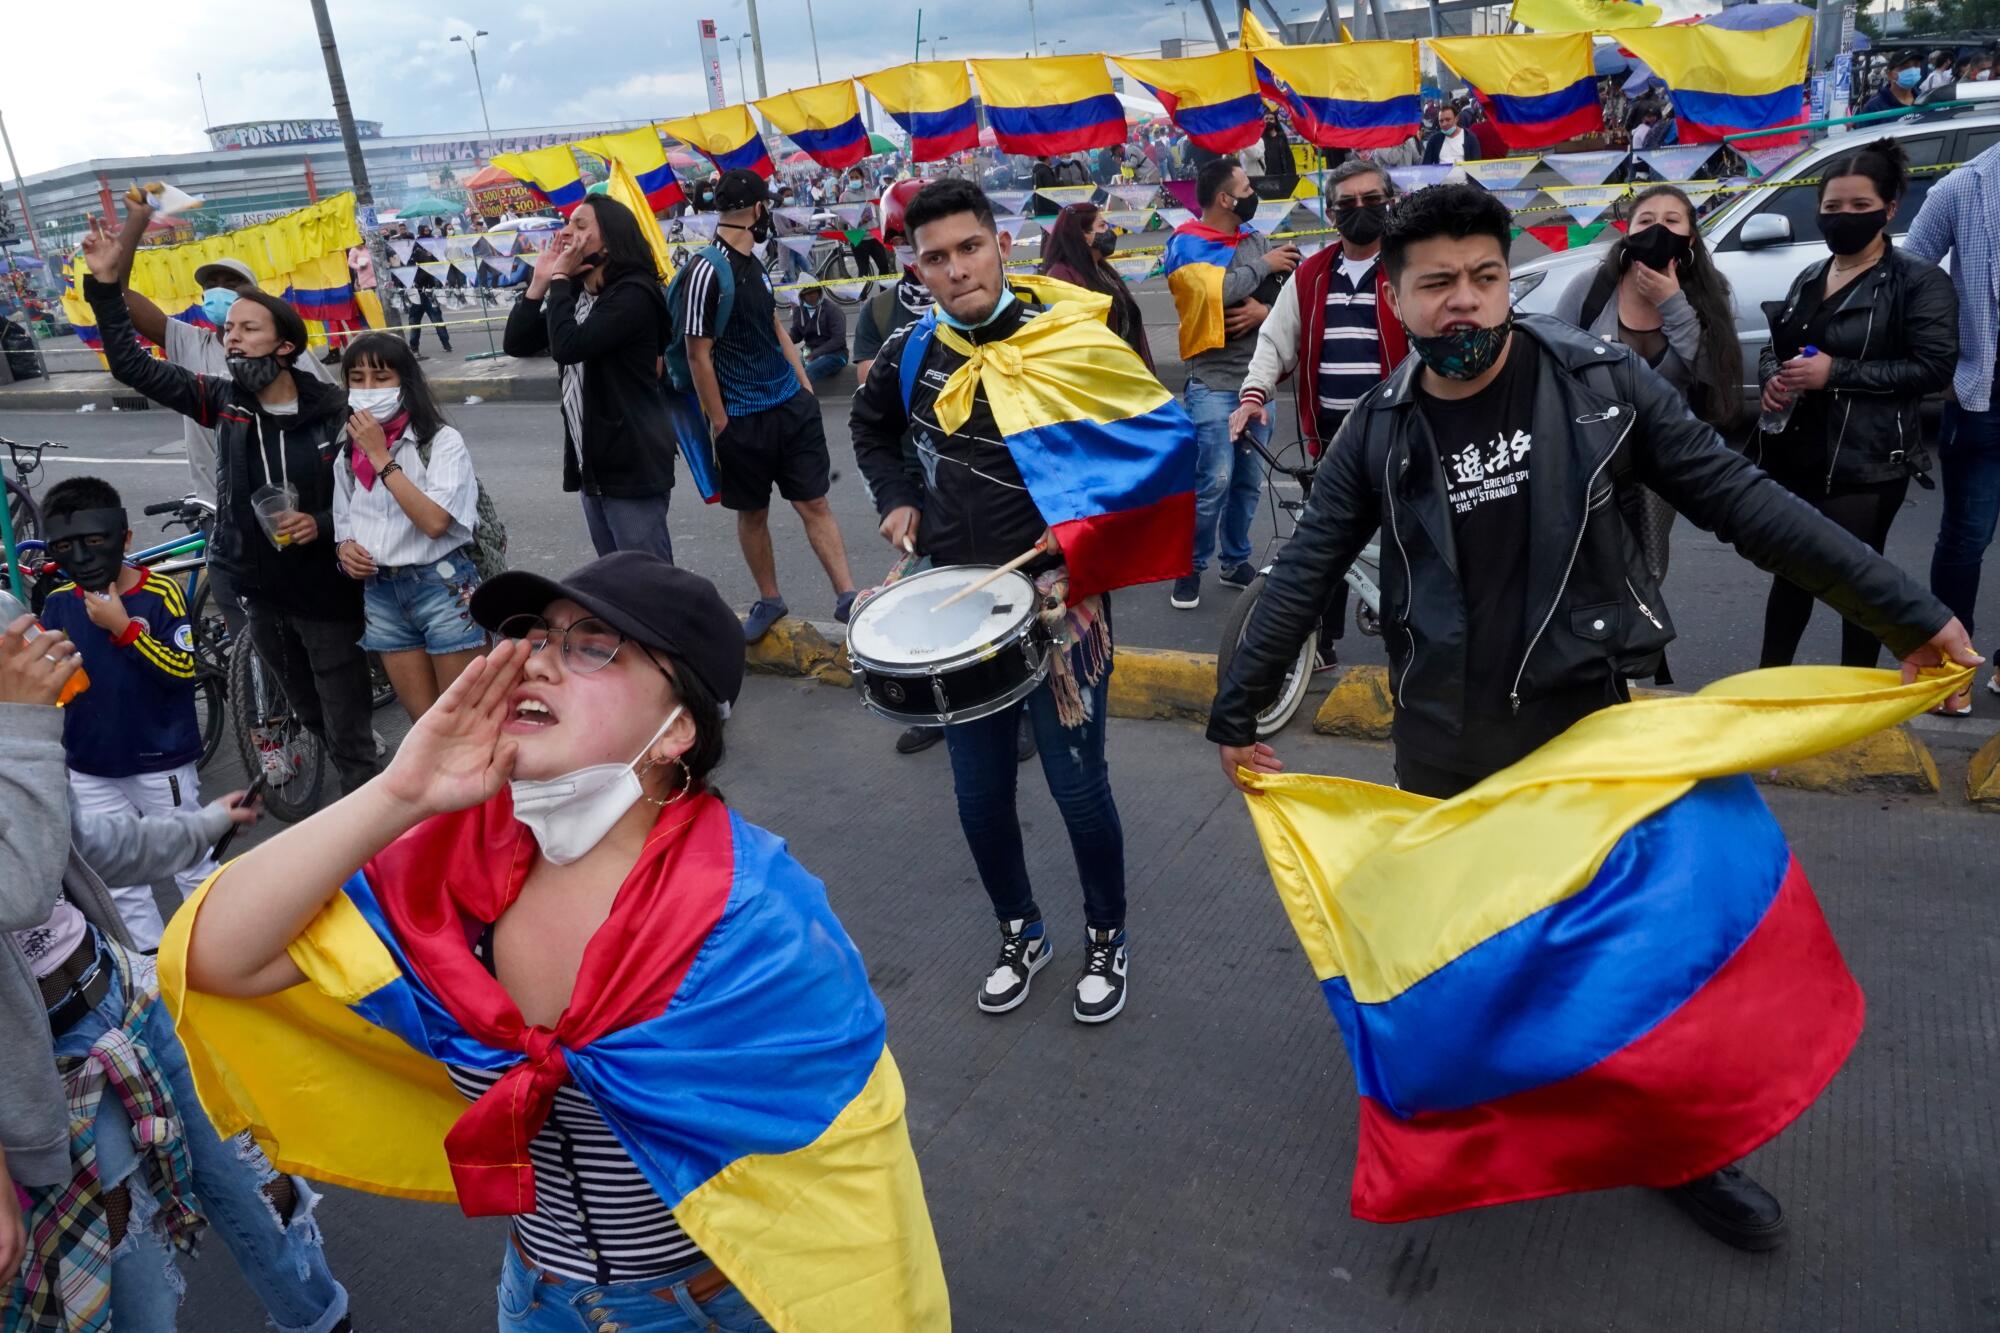 Young people wave flags, shout slogans and dance in the street during a protest in Bogota, Colombia.